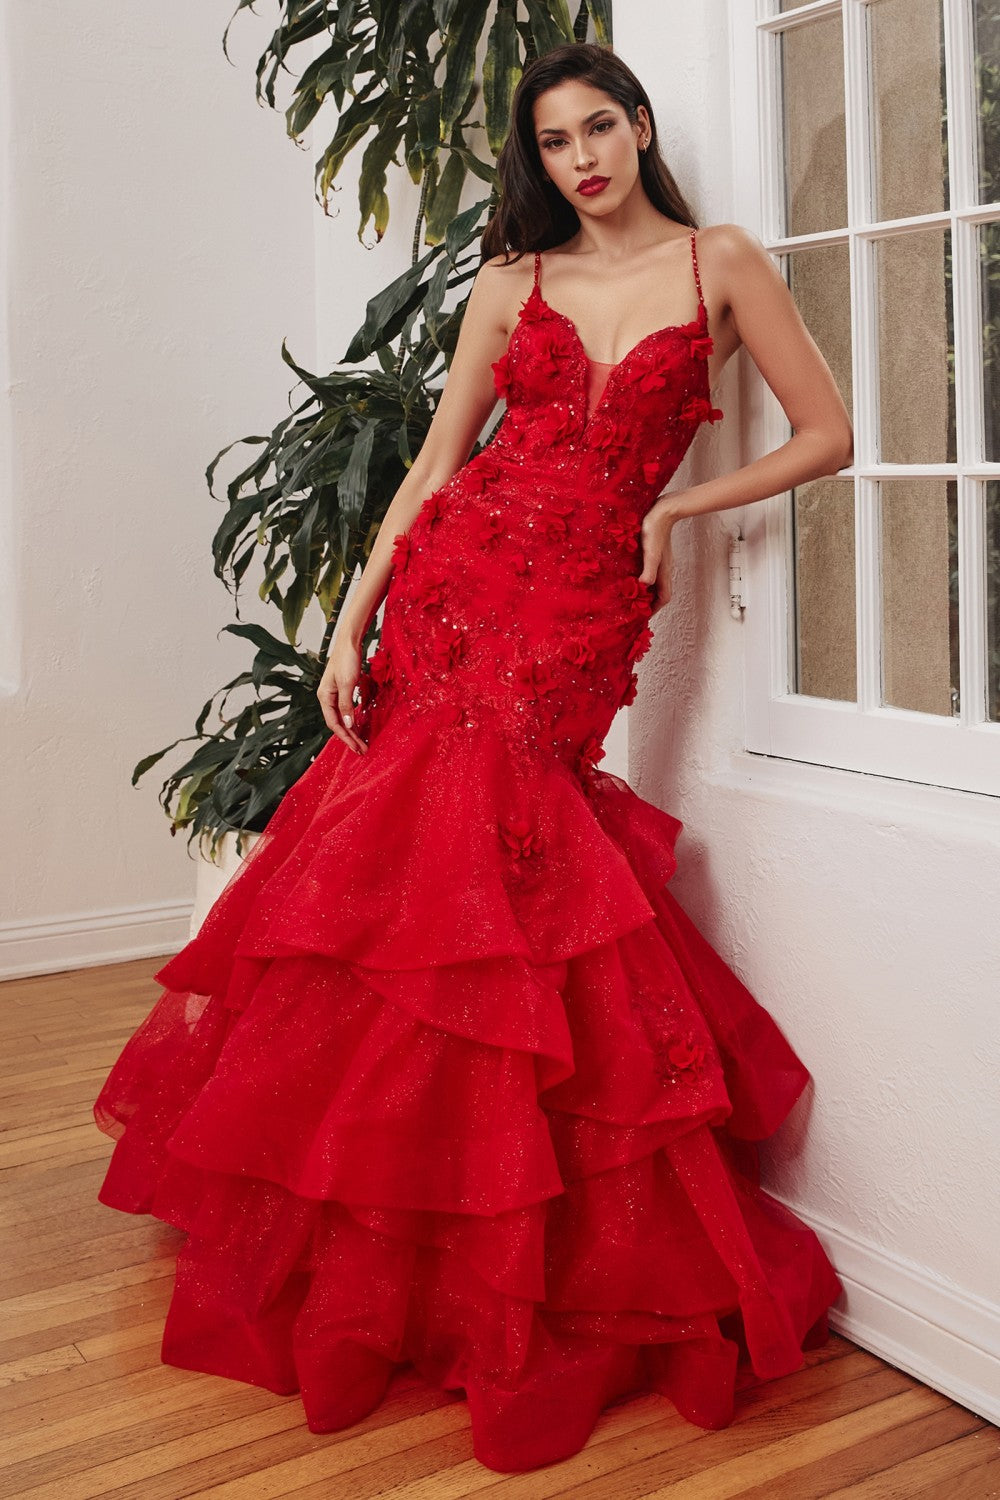 Red Mermaid Royal Gala Hollywood Prom & Elegant Formal Tiered Floral gown Deep V-neck Backless Bodice Ruffled Skirt Sexy Dress CDCM329 Elsy Style Prom Dress